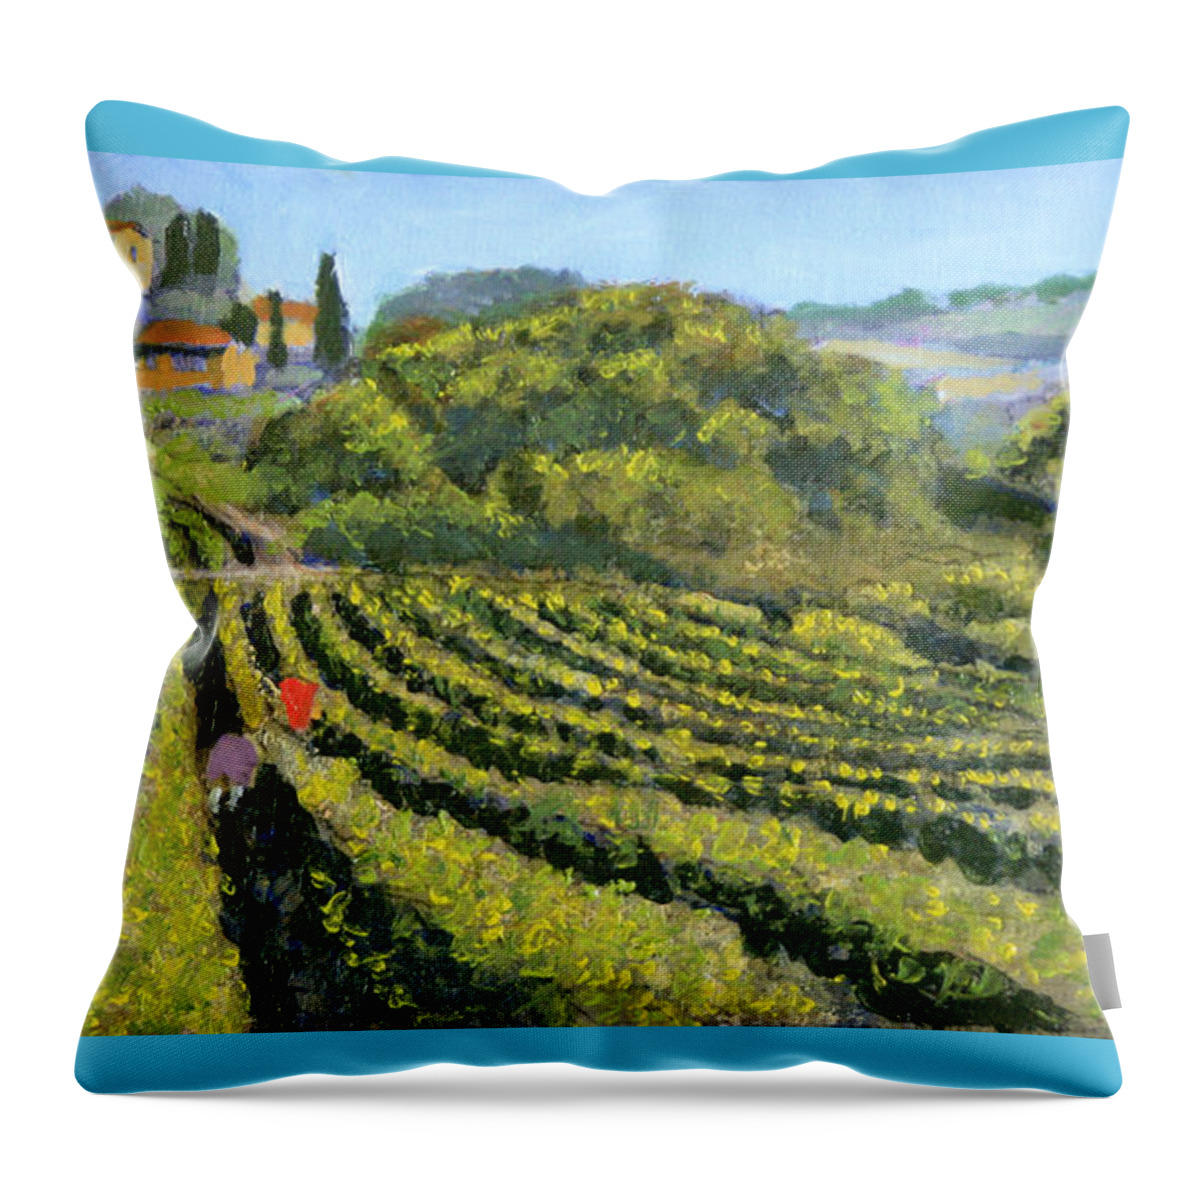 Grapes Throw Pillow featuring the painting La Raccolte delle Uva by David Zimmerman